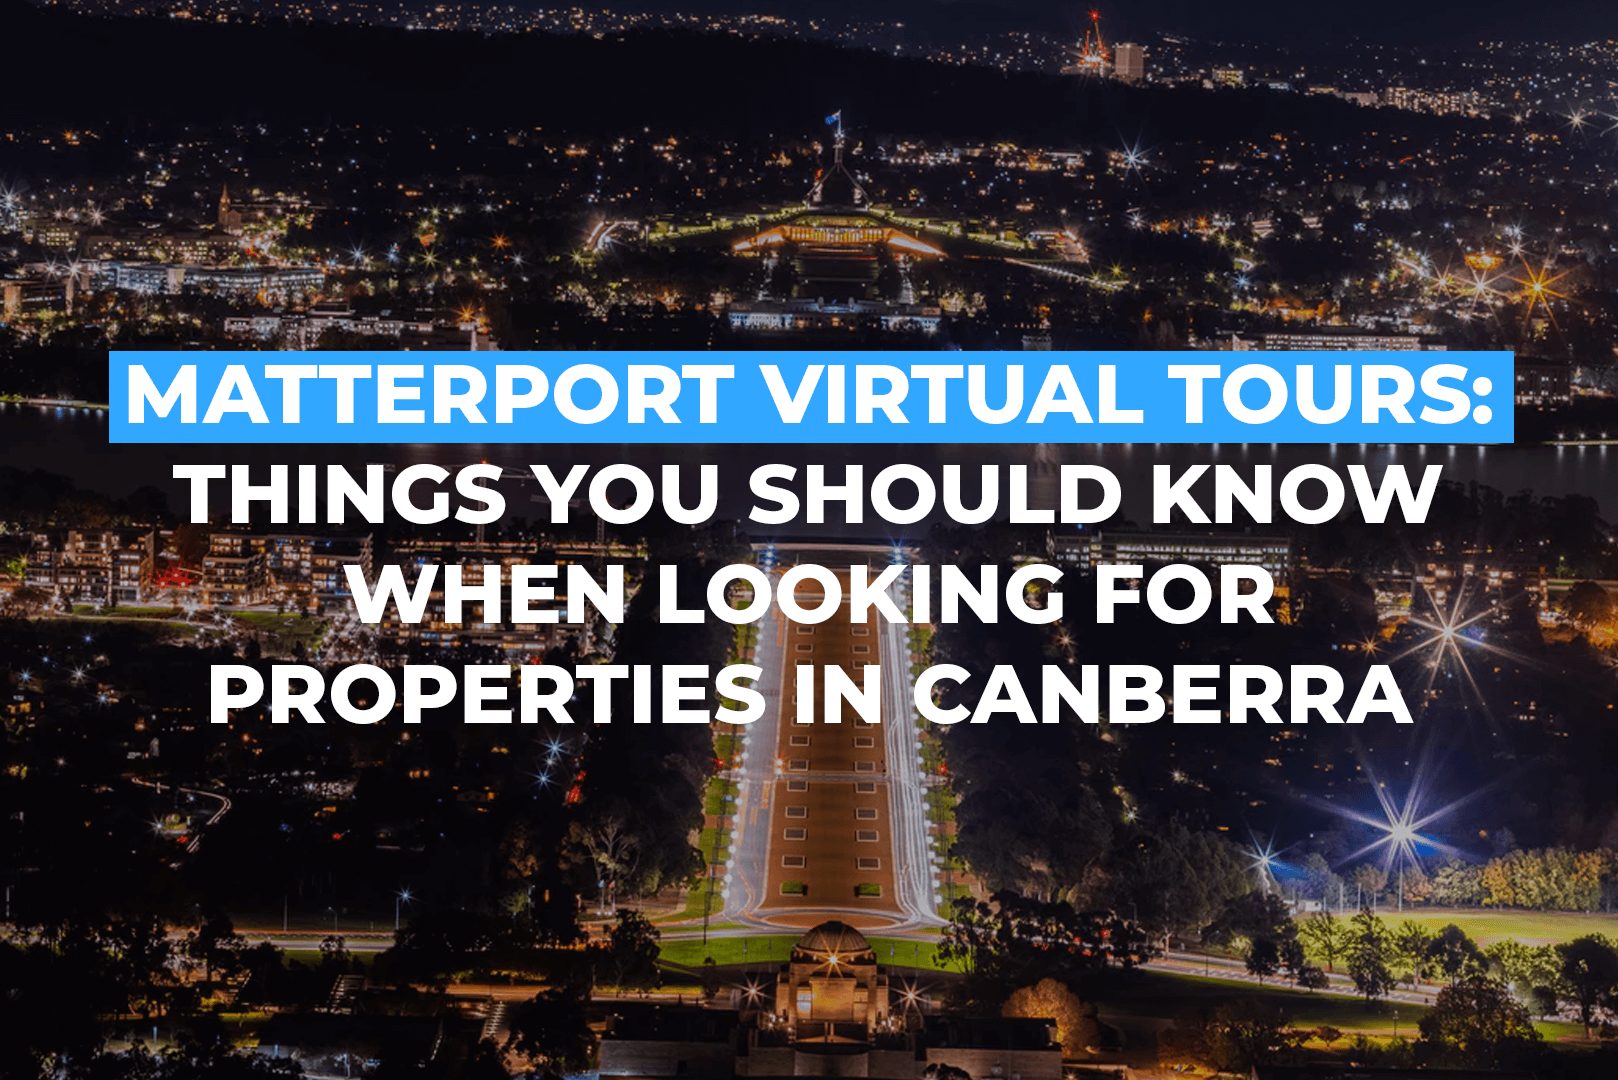 Matterport Virtual Tours: Things You Should Know When Looking For Properties In Canberra